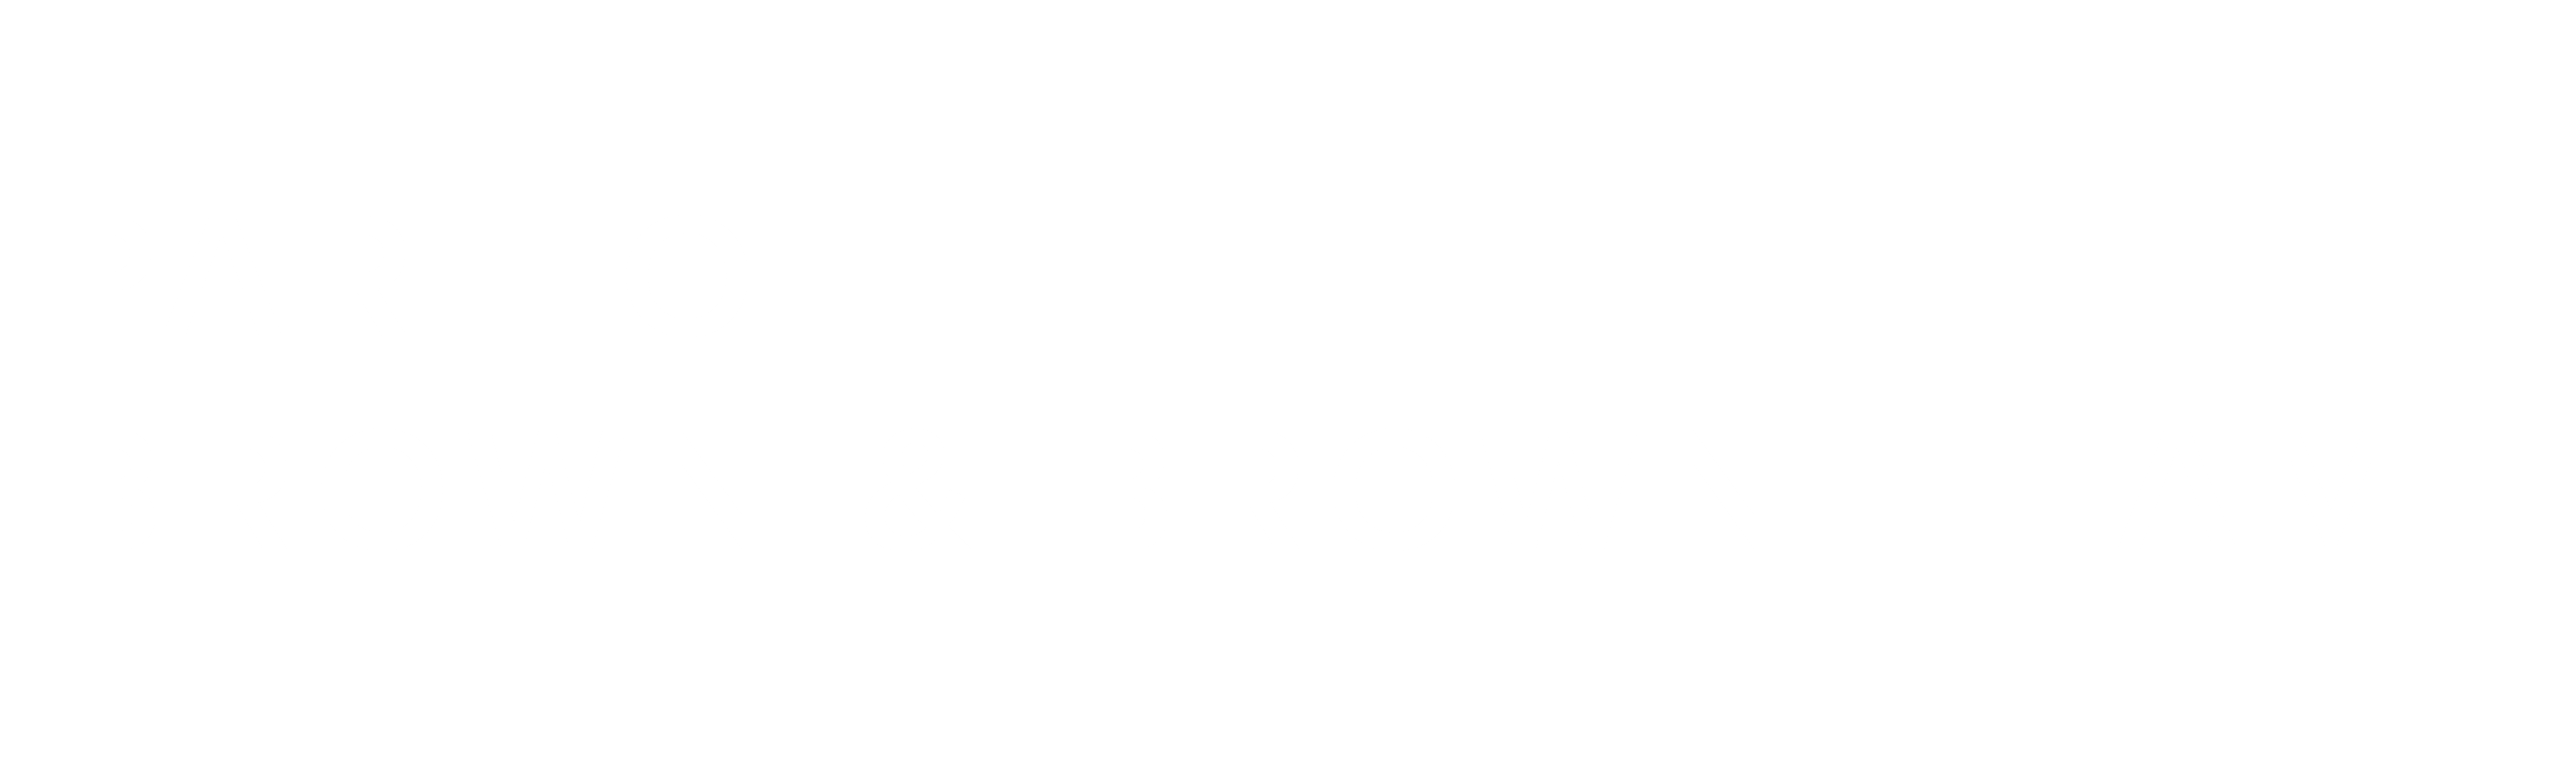 Part of the Brown & Brown Team - White